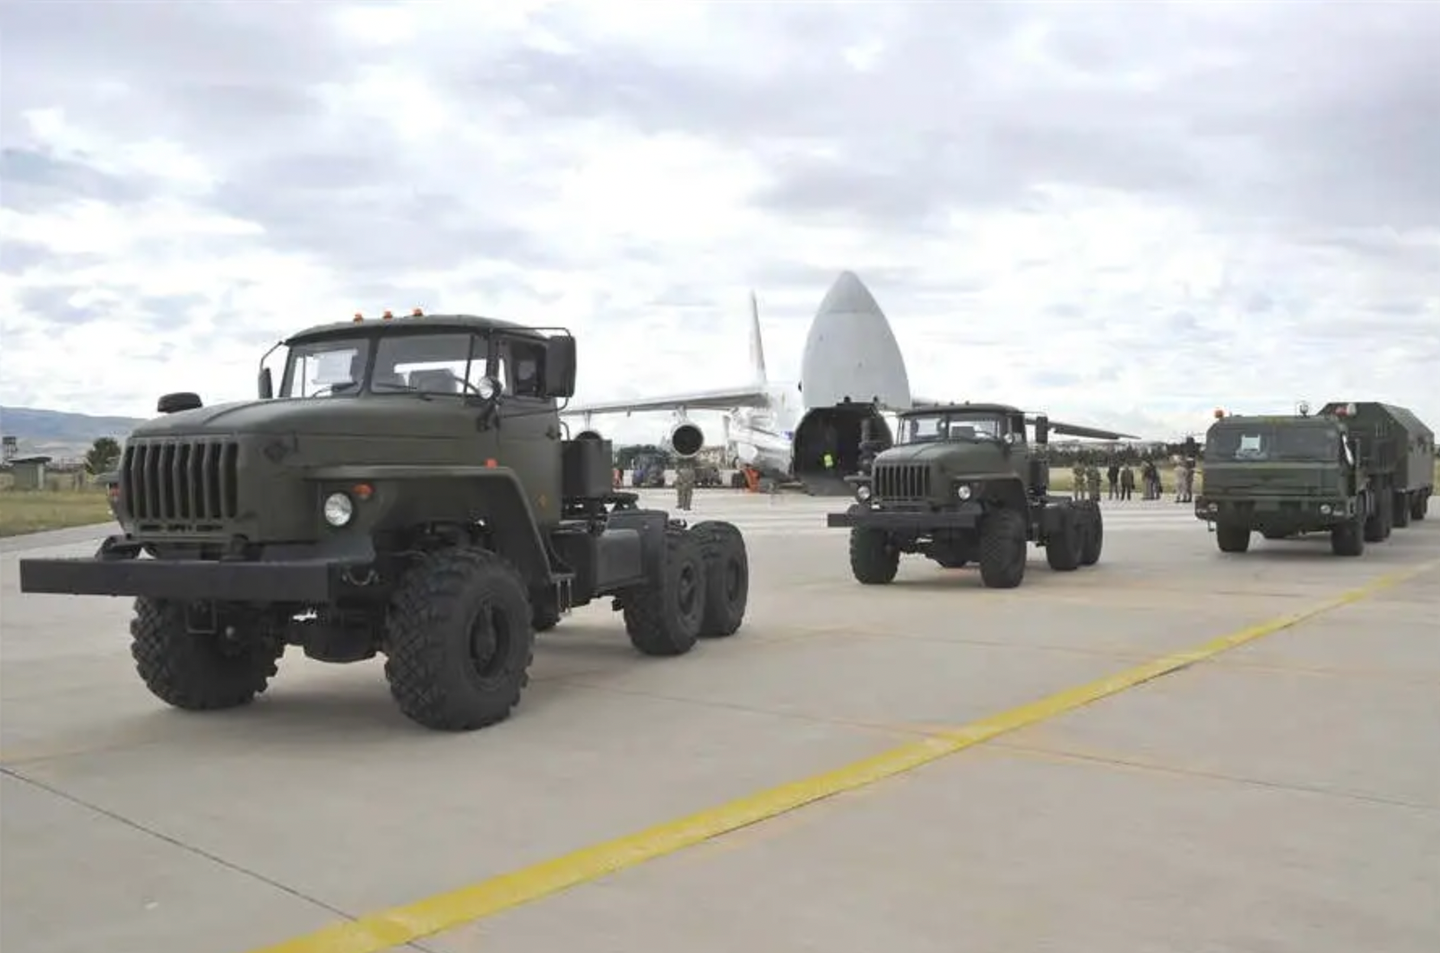 Trucks associated with the S-400 air defense system arrive at Murted Air Base in Turkey, in July 2019.&nbsp;<em>TURKISH MINISTRY OF NATIONAL DEFENSE</em>